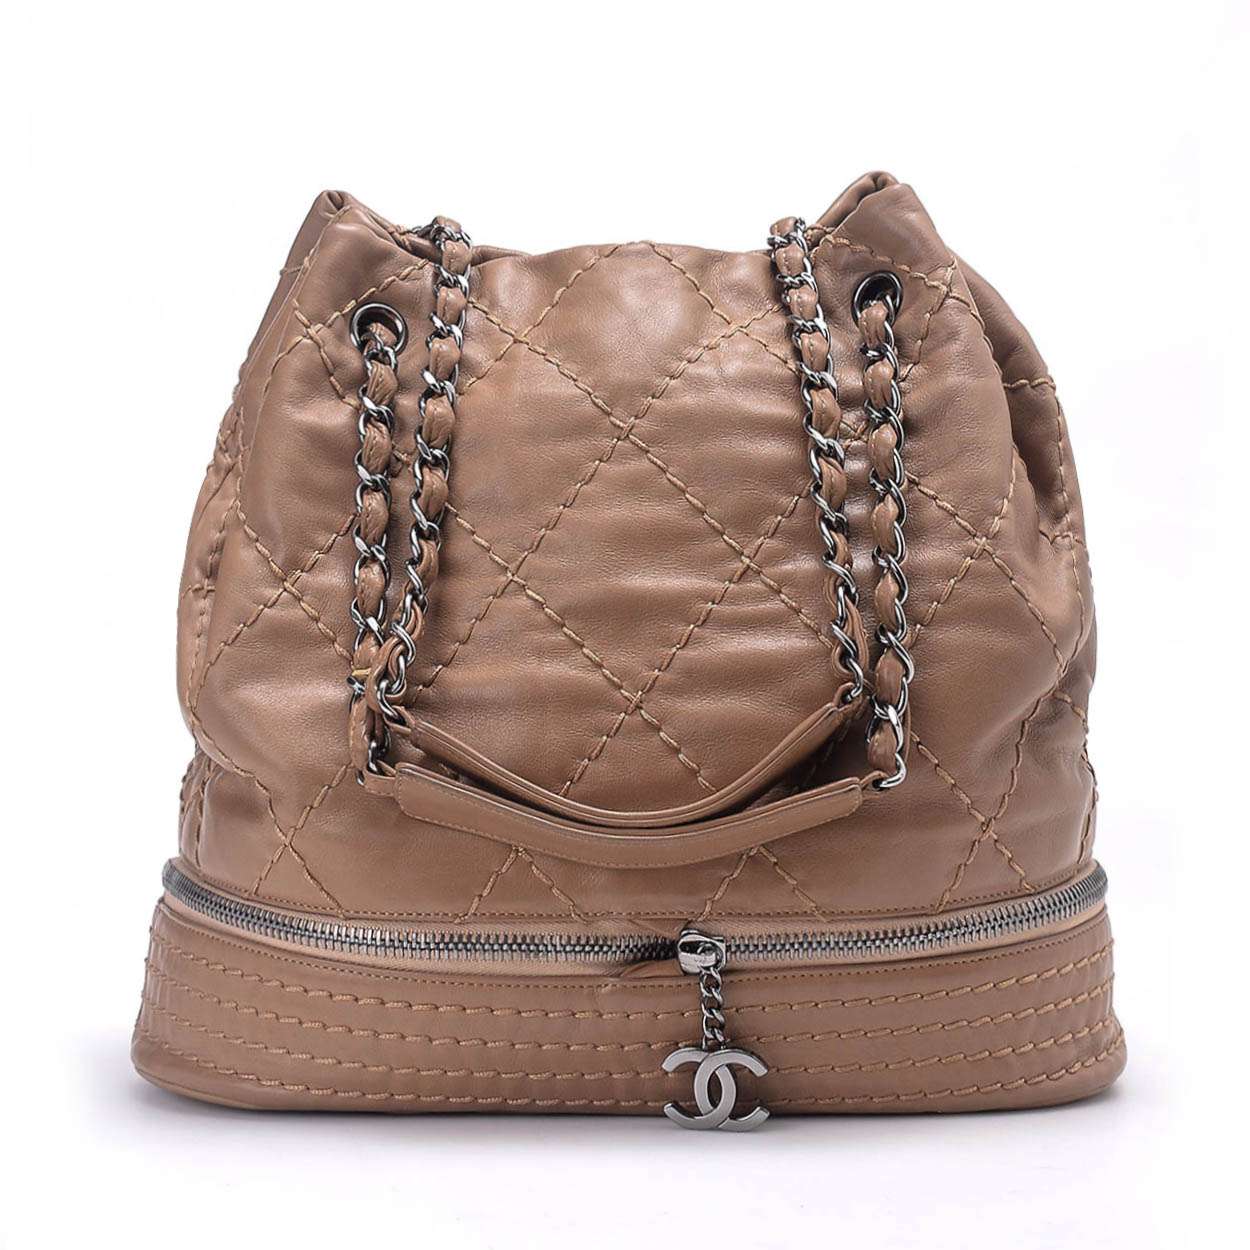 Chanel - Quilted Lambskin Leather Bucket Bag